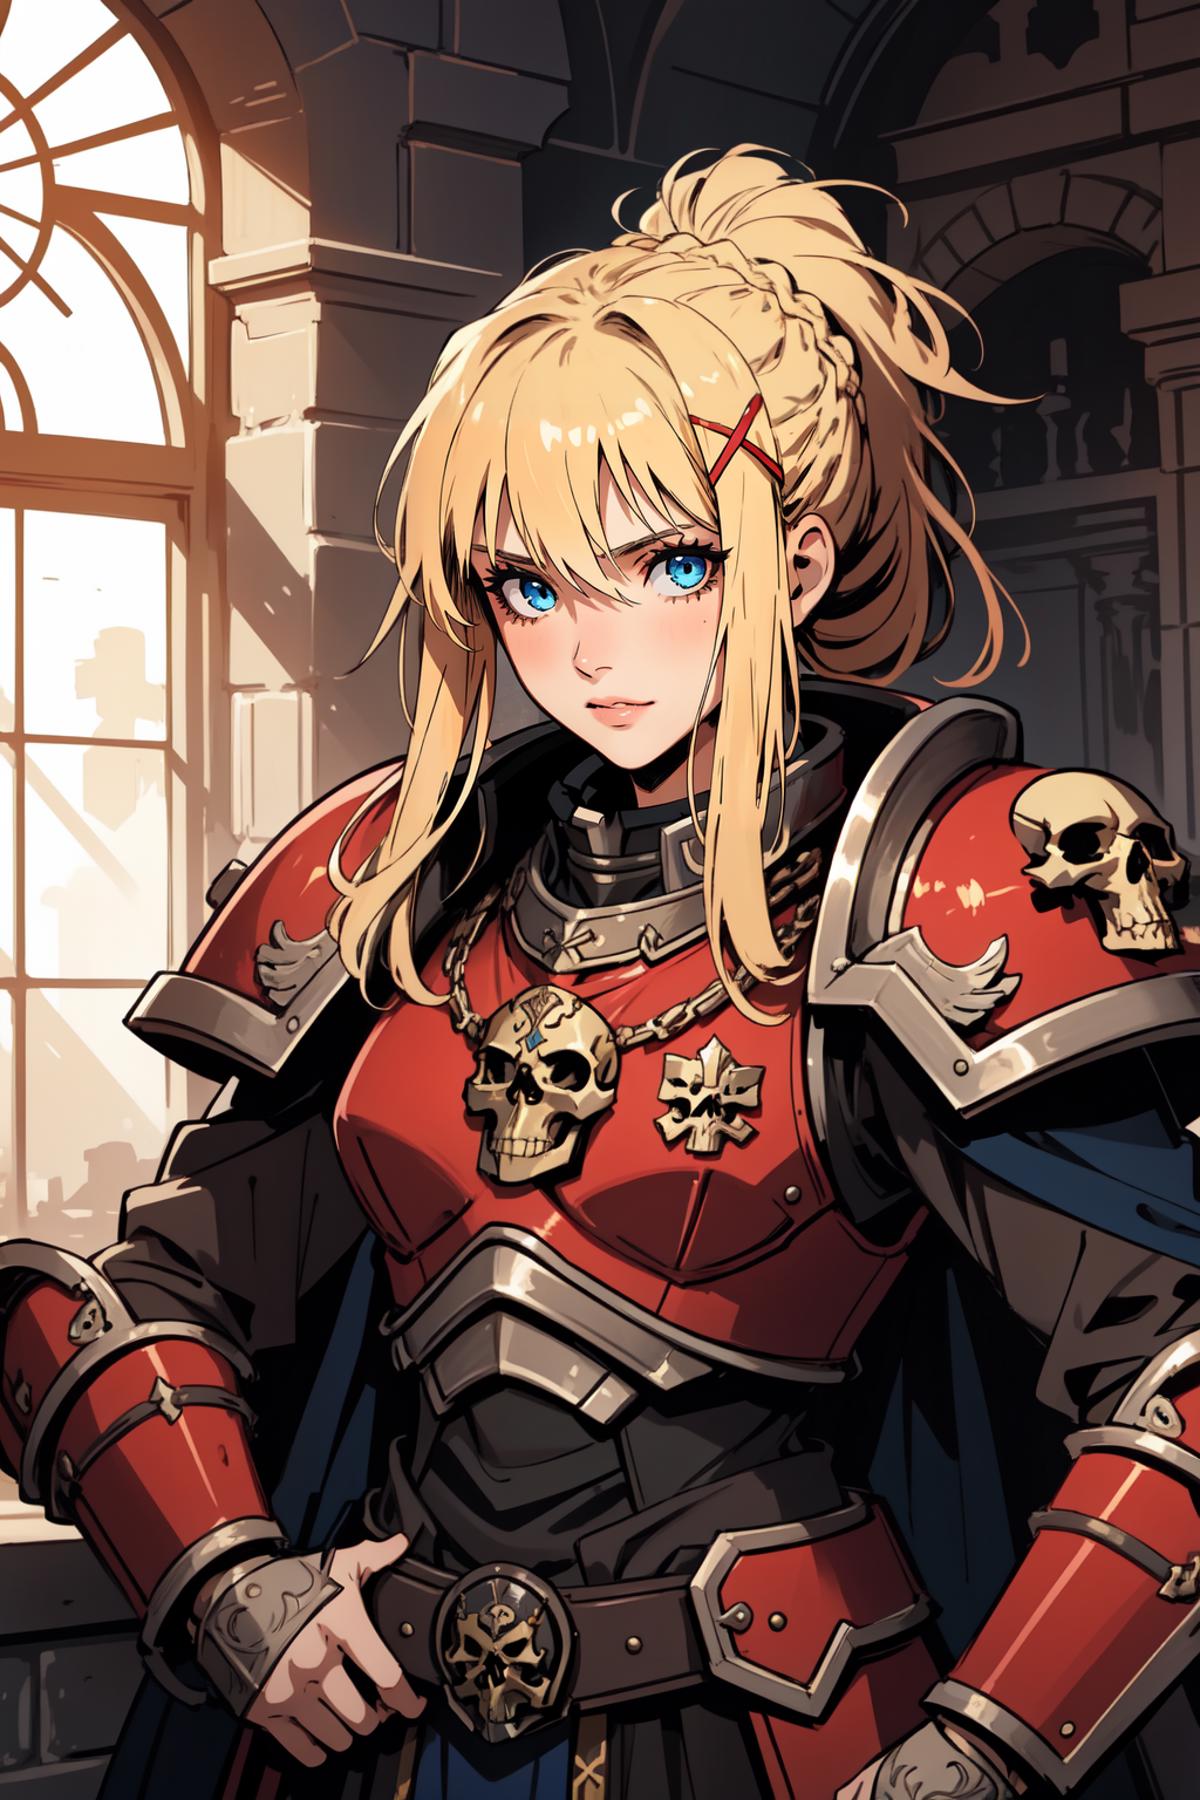 A red armored warrior with blue eyes and a red bow in her hair.